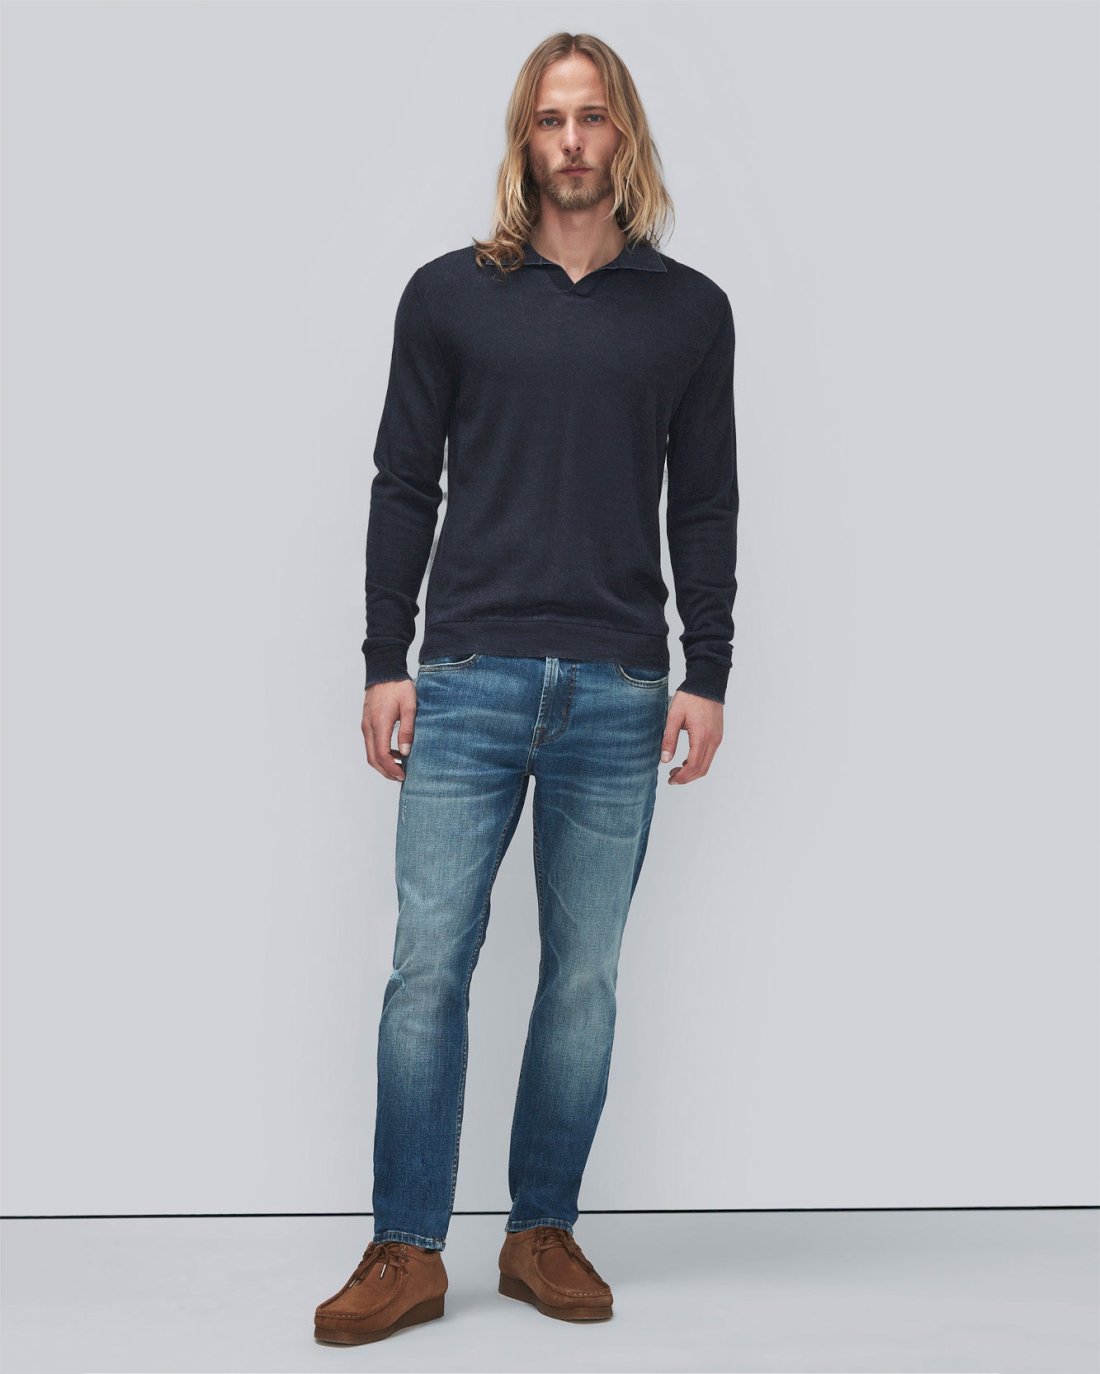 7 For All Mankind Merino Polo in Navy 7M037211NVY